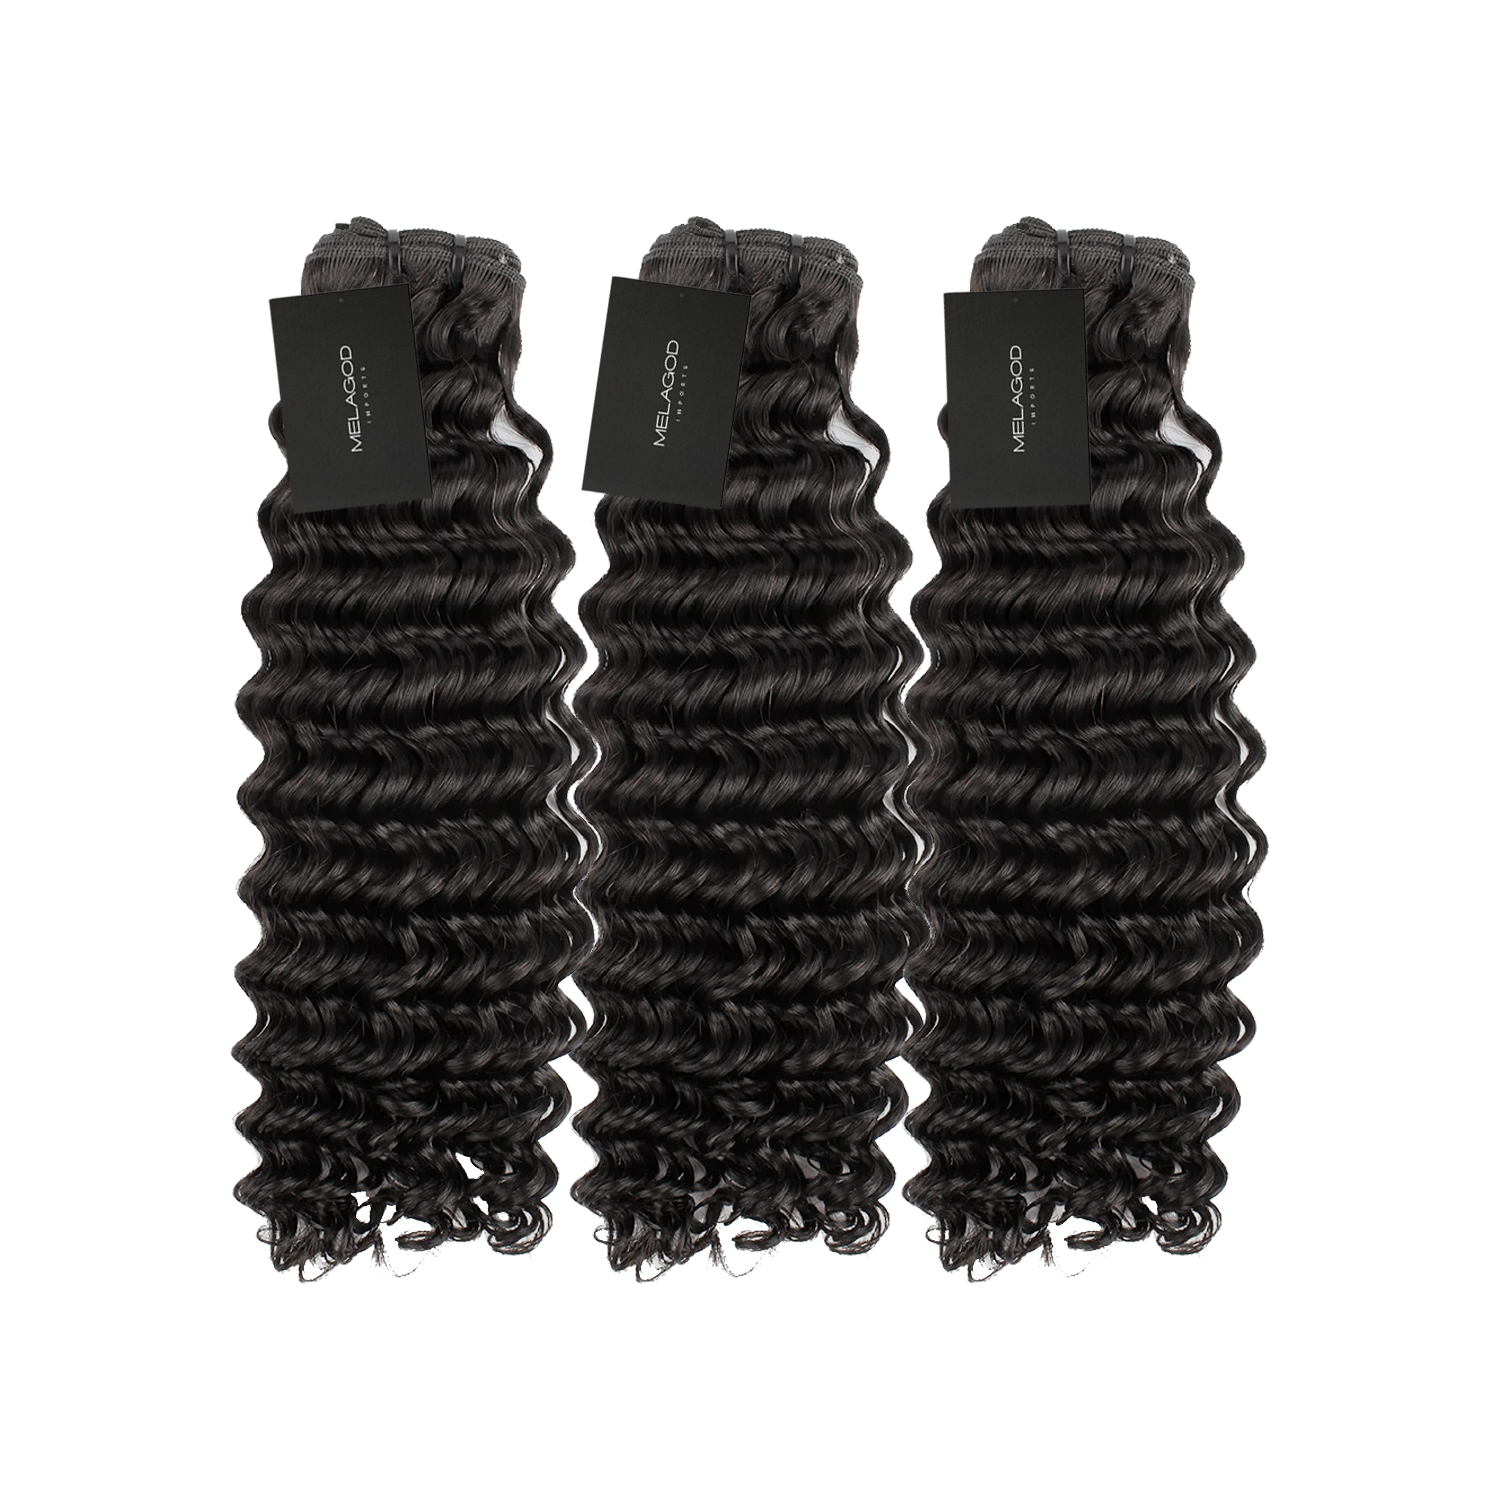 MelaGod Imports Allure Deep Wavy features a super sexy curly pattern that's easy to manage. The perfect heat free style that goes well with any look. Activate your curls by adding water, and you're all set to go!   Key Features:   Thick & Full Hair Extensions: Luxuriate in the richness of these thick voluminous hair bundles, providing a natural finish, and pairs perfectly with natural or relaxed hair. 100% Human Hair, Natural Luster Versatile Styling & Custom Coloring